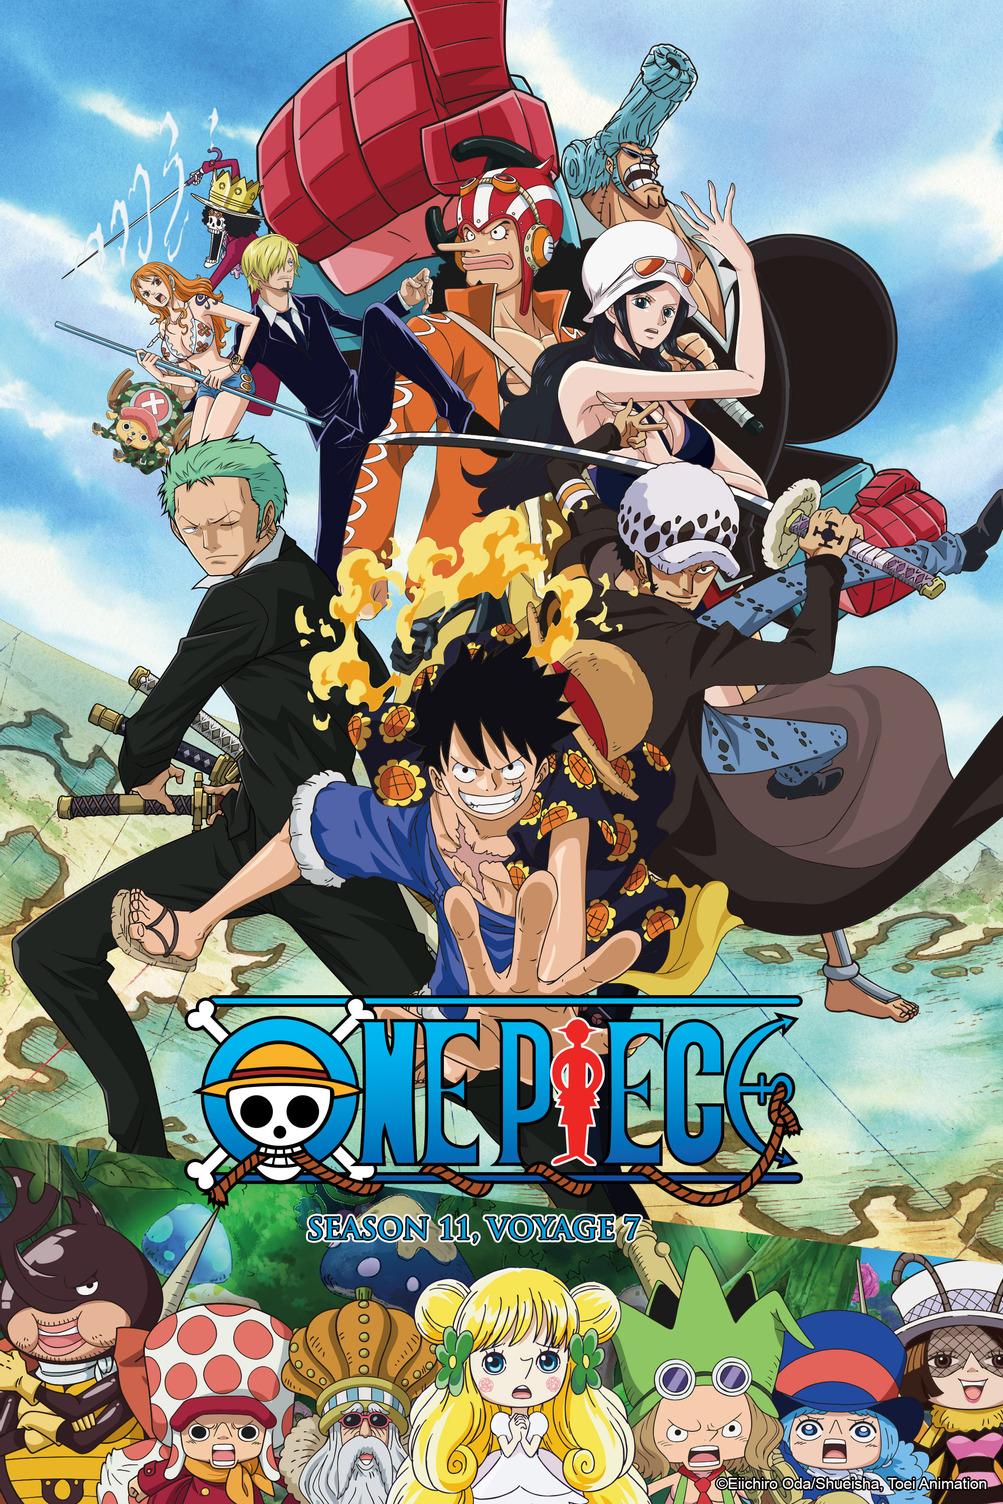 One Piece It S Law Versus Doflamingo In The Epic Continuation Of Dressrosa Are You Ready One Piece Season 11 Voyage 7 Episodes 707 719 Are Available On Digital Storefronts Today